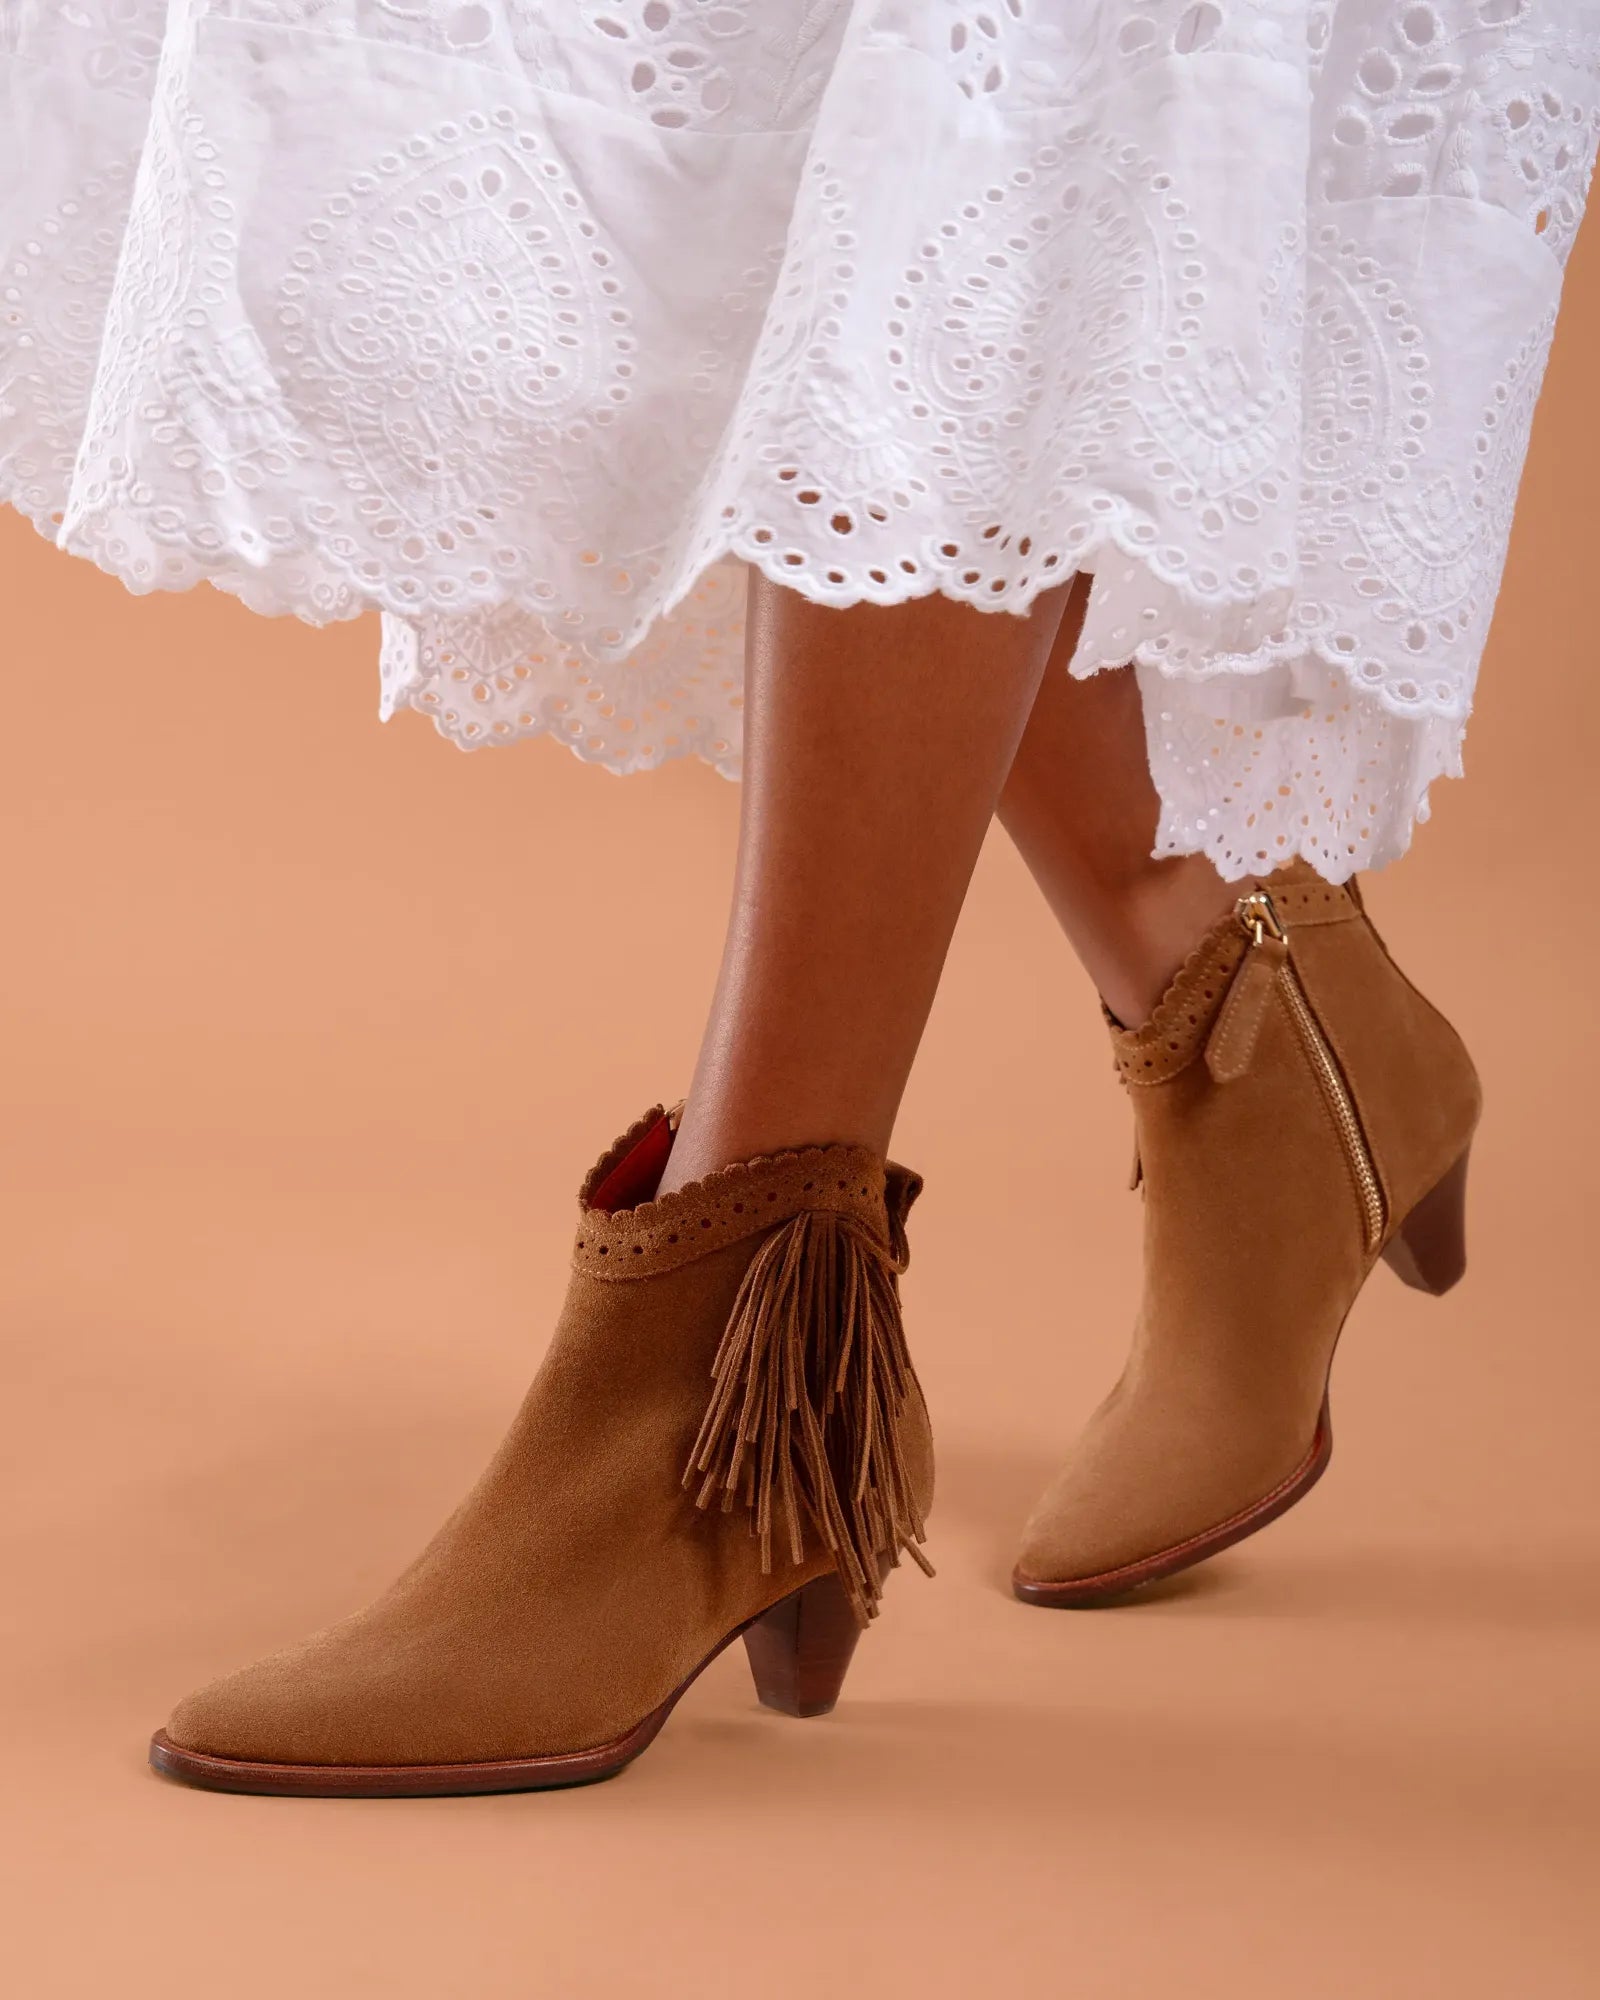 Fringed Regina Ankle Boots - Tan Suede